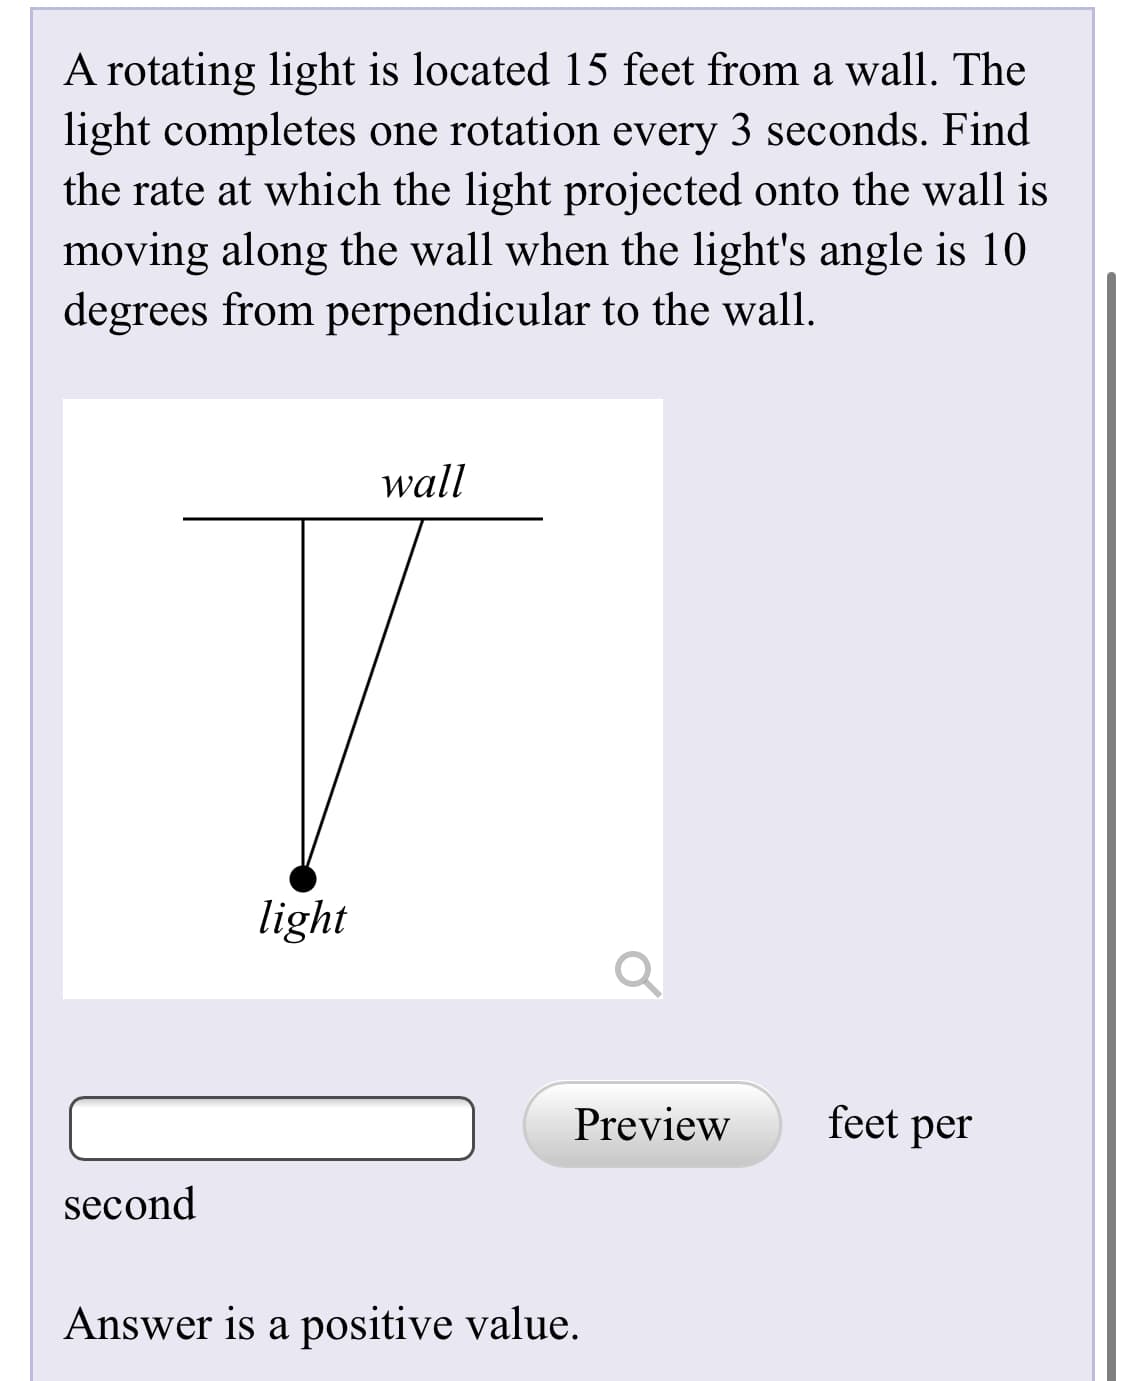 A rotating light is located 15 feet from a wall. The
light completes one rotation every 3 seconds. Find
the rate at which the light projected onto the wall is
moving along the wall when the light's angle is 10
degrees from perpendicular to the wall.
wall
light
Preview
feet per
second
Answer is a positive value.
